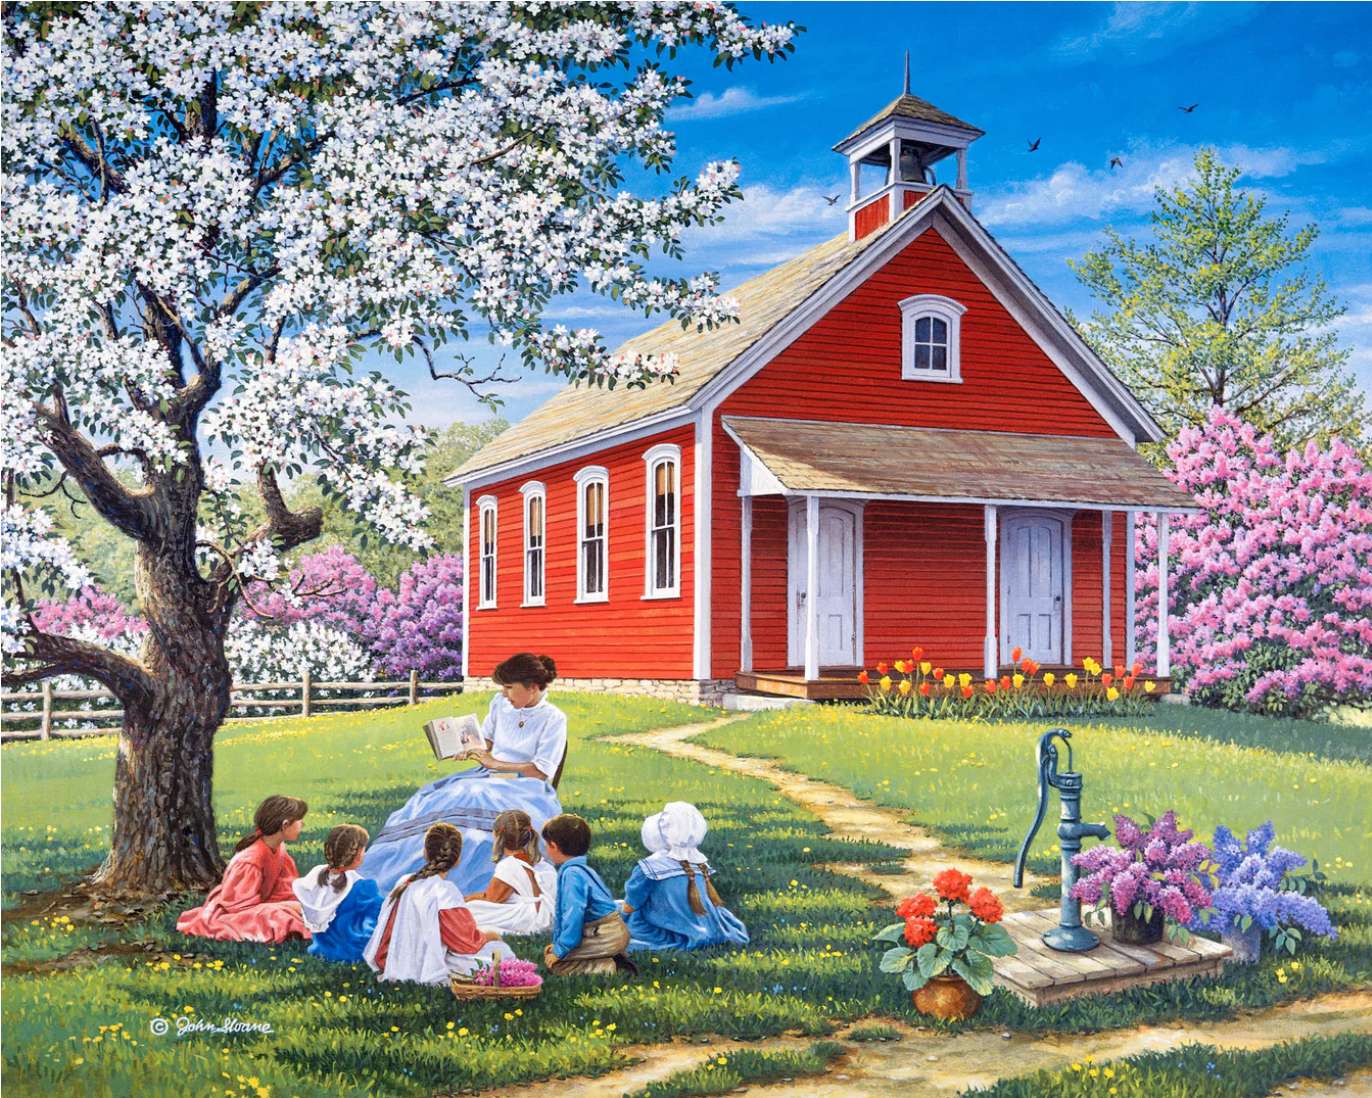 class under a tree jigsaw puzzle online